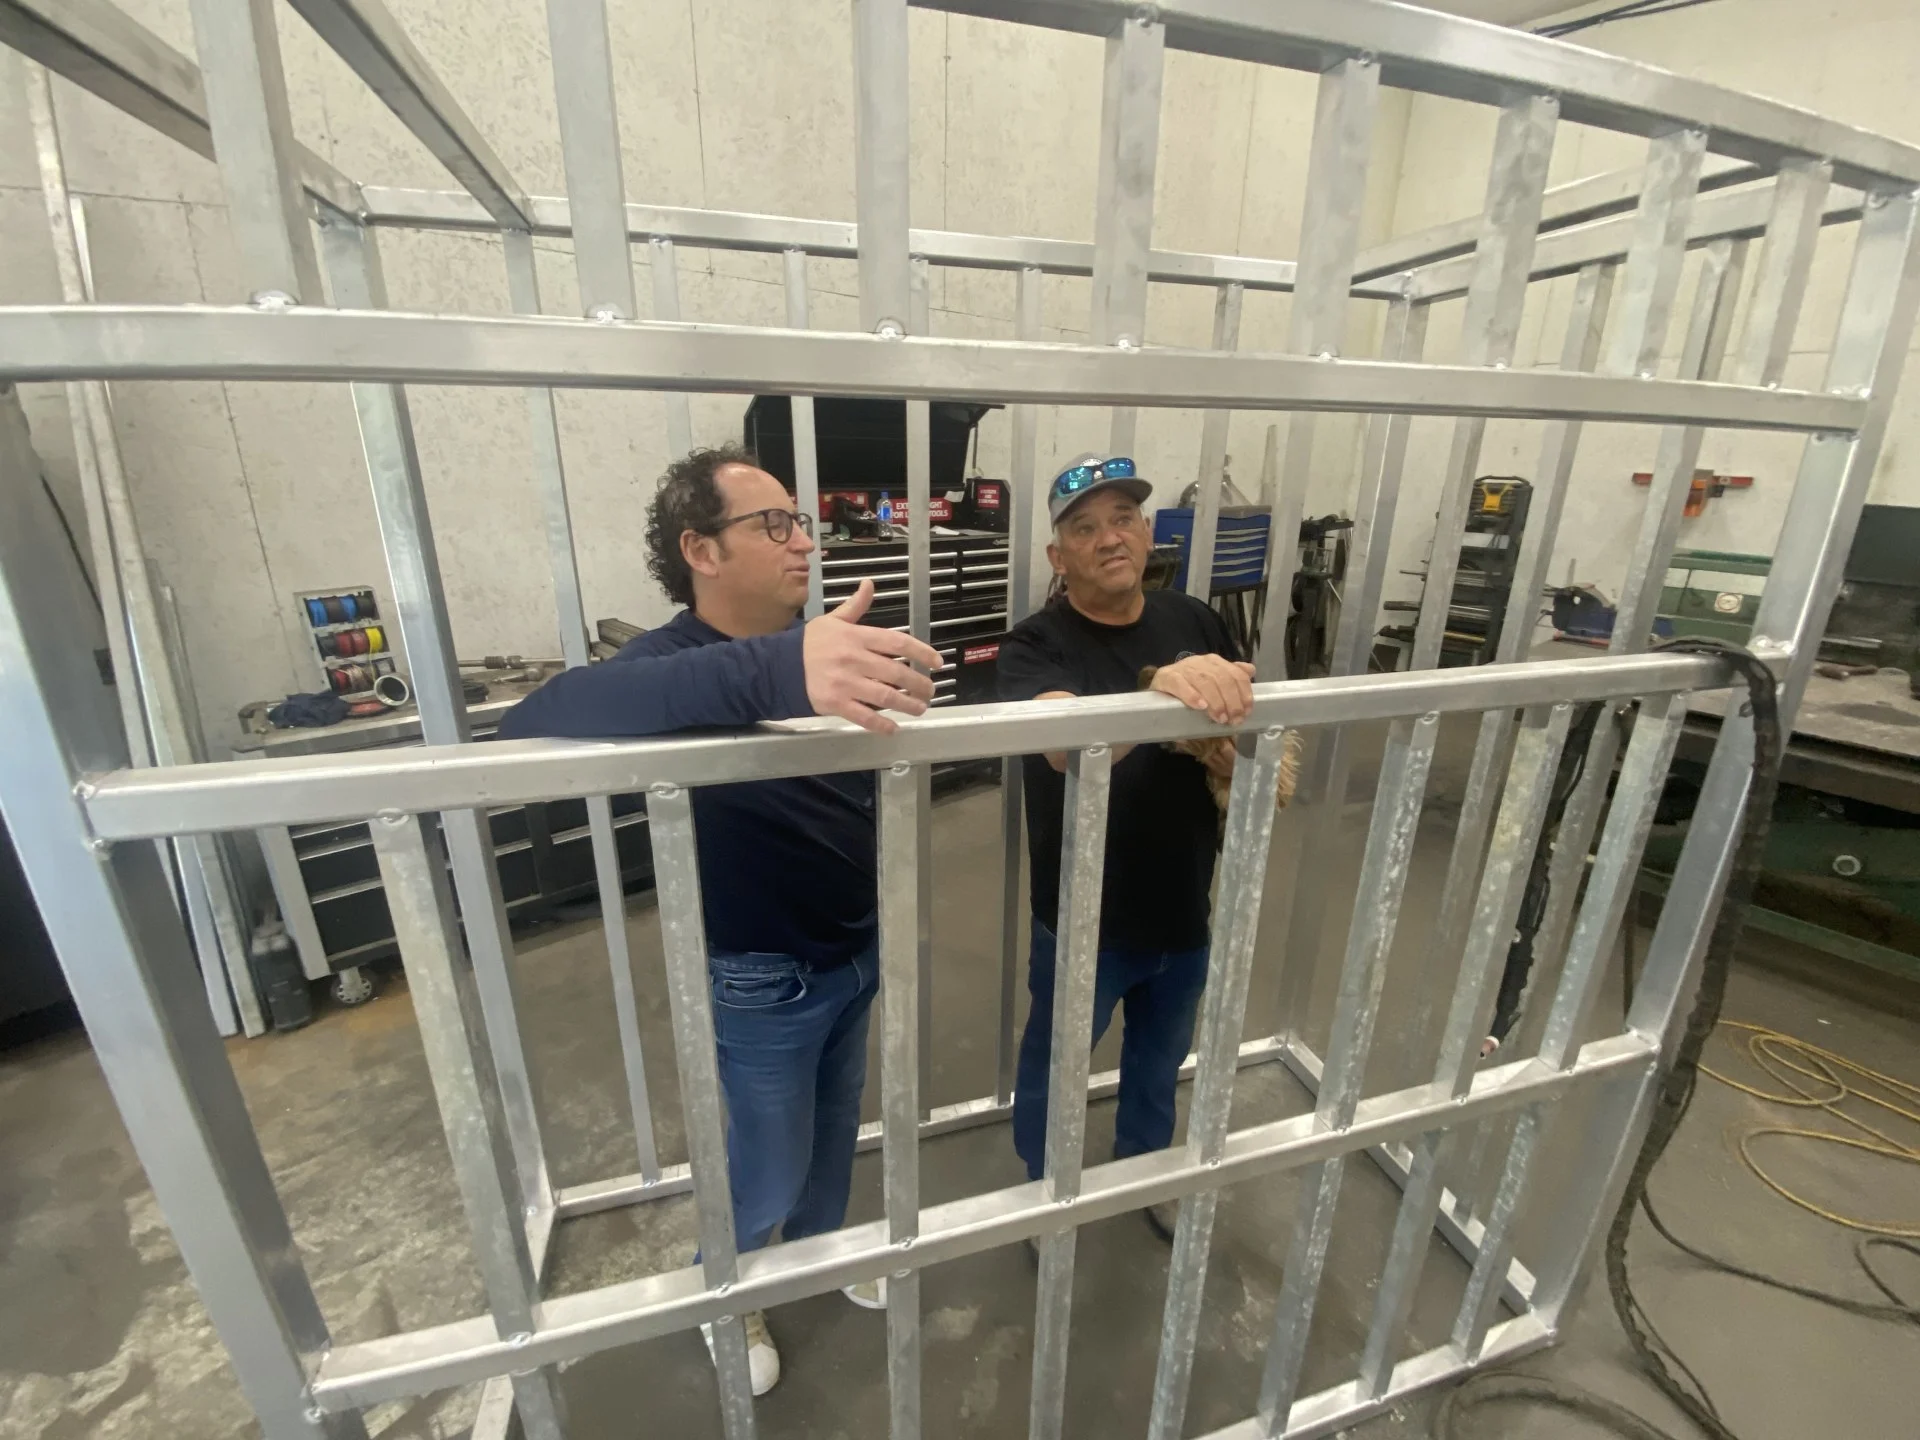 Nathan Coleman: Great white shark expedition coming to Nova Scotia in August 2023. Dr. Neil Hammerschlag and Art Gaetan inspect the cage in photo.